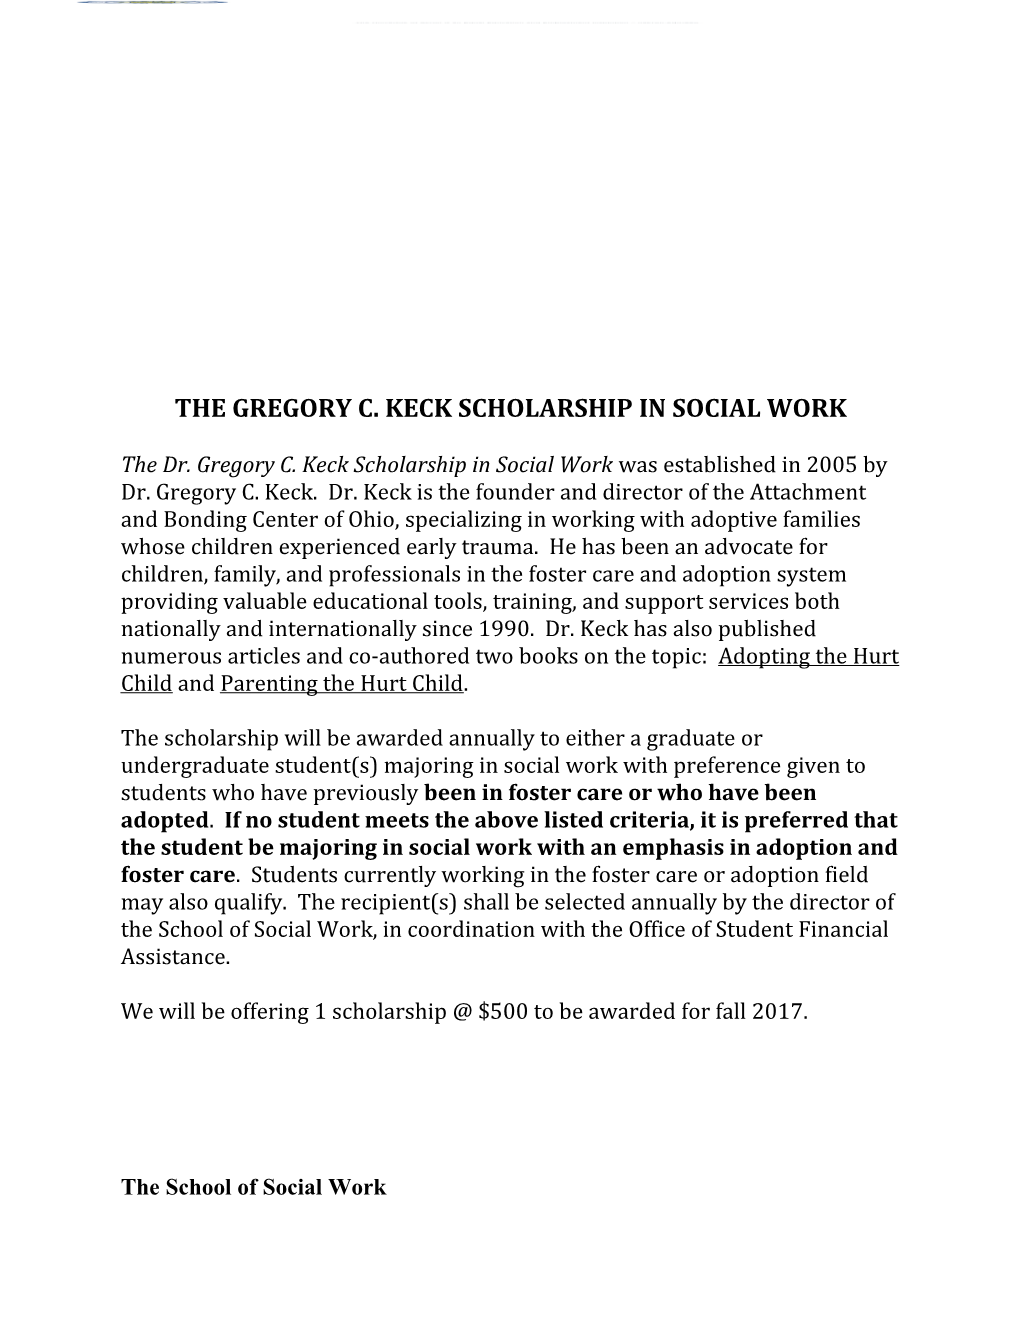 The Gregory C. Keck Scholarship in Social Work